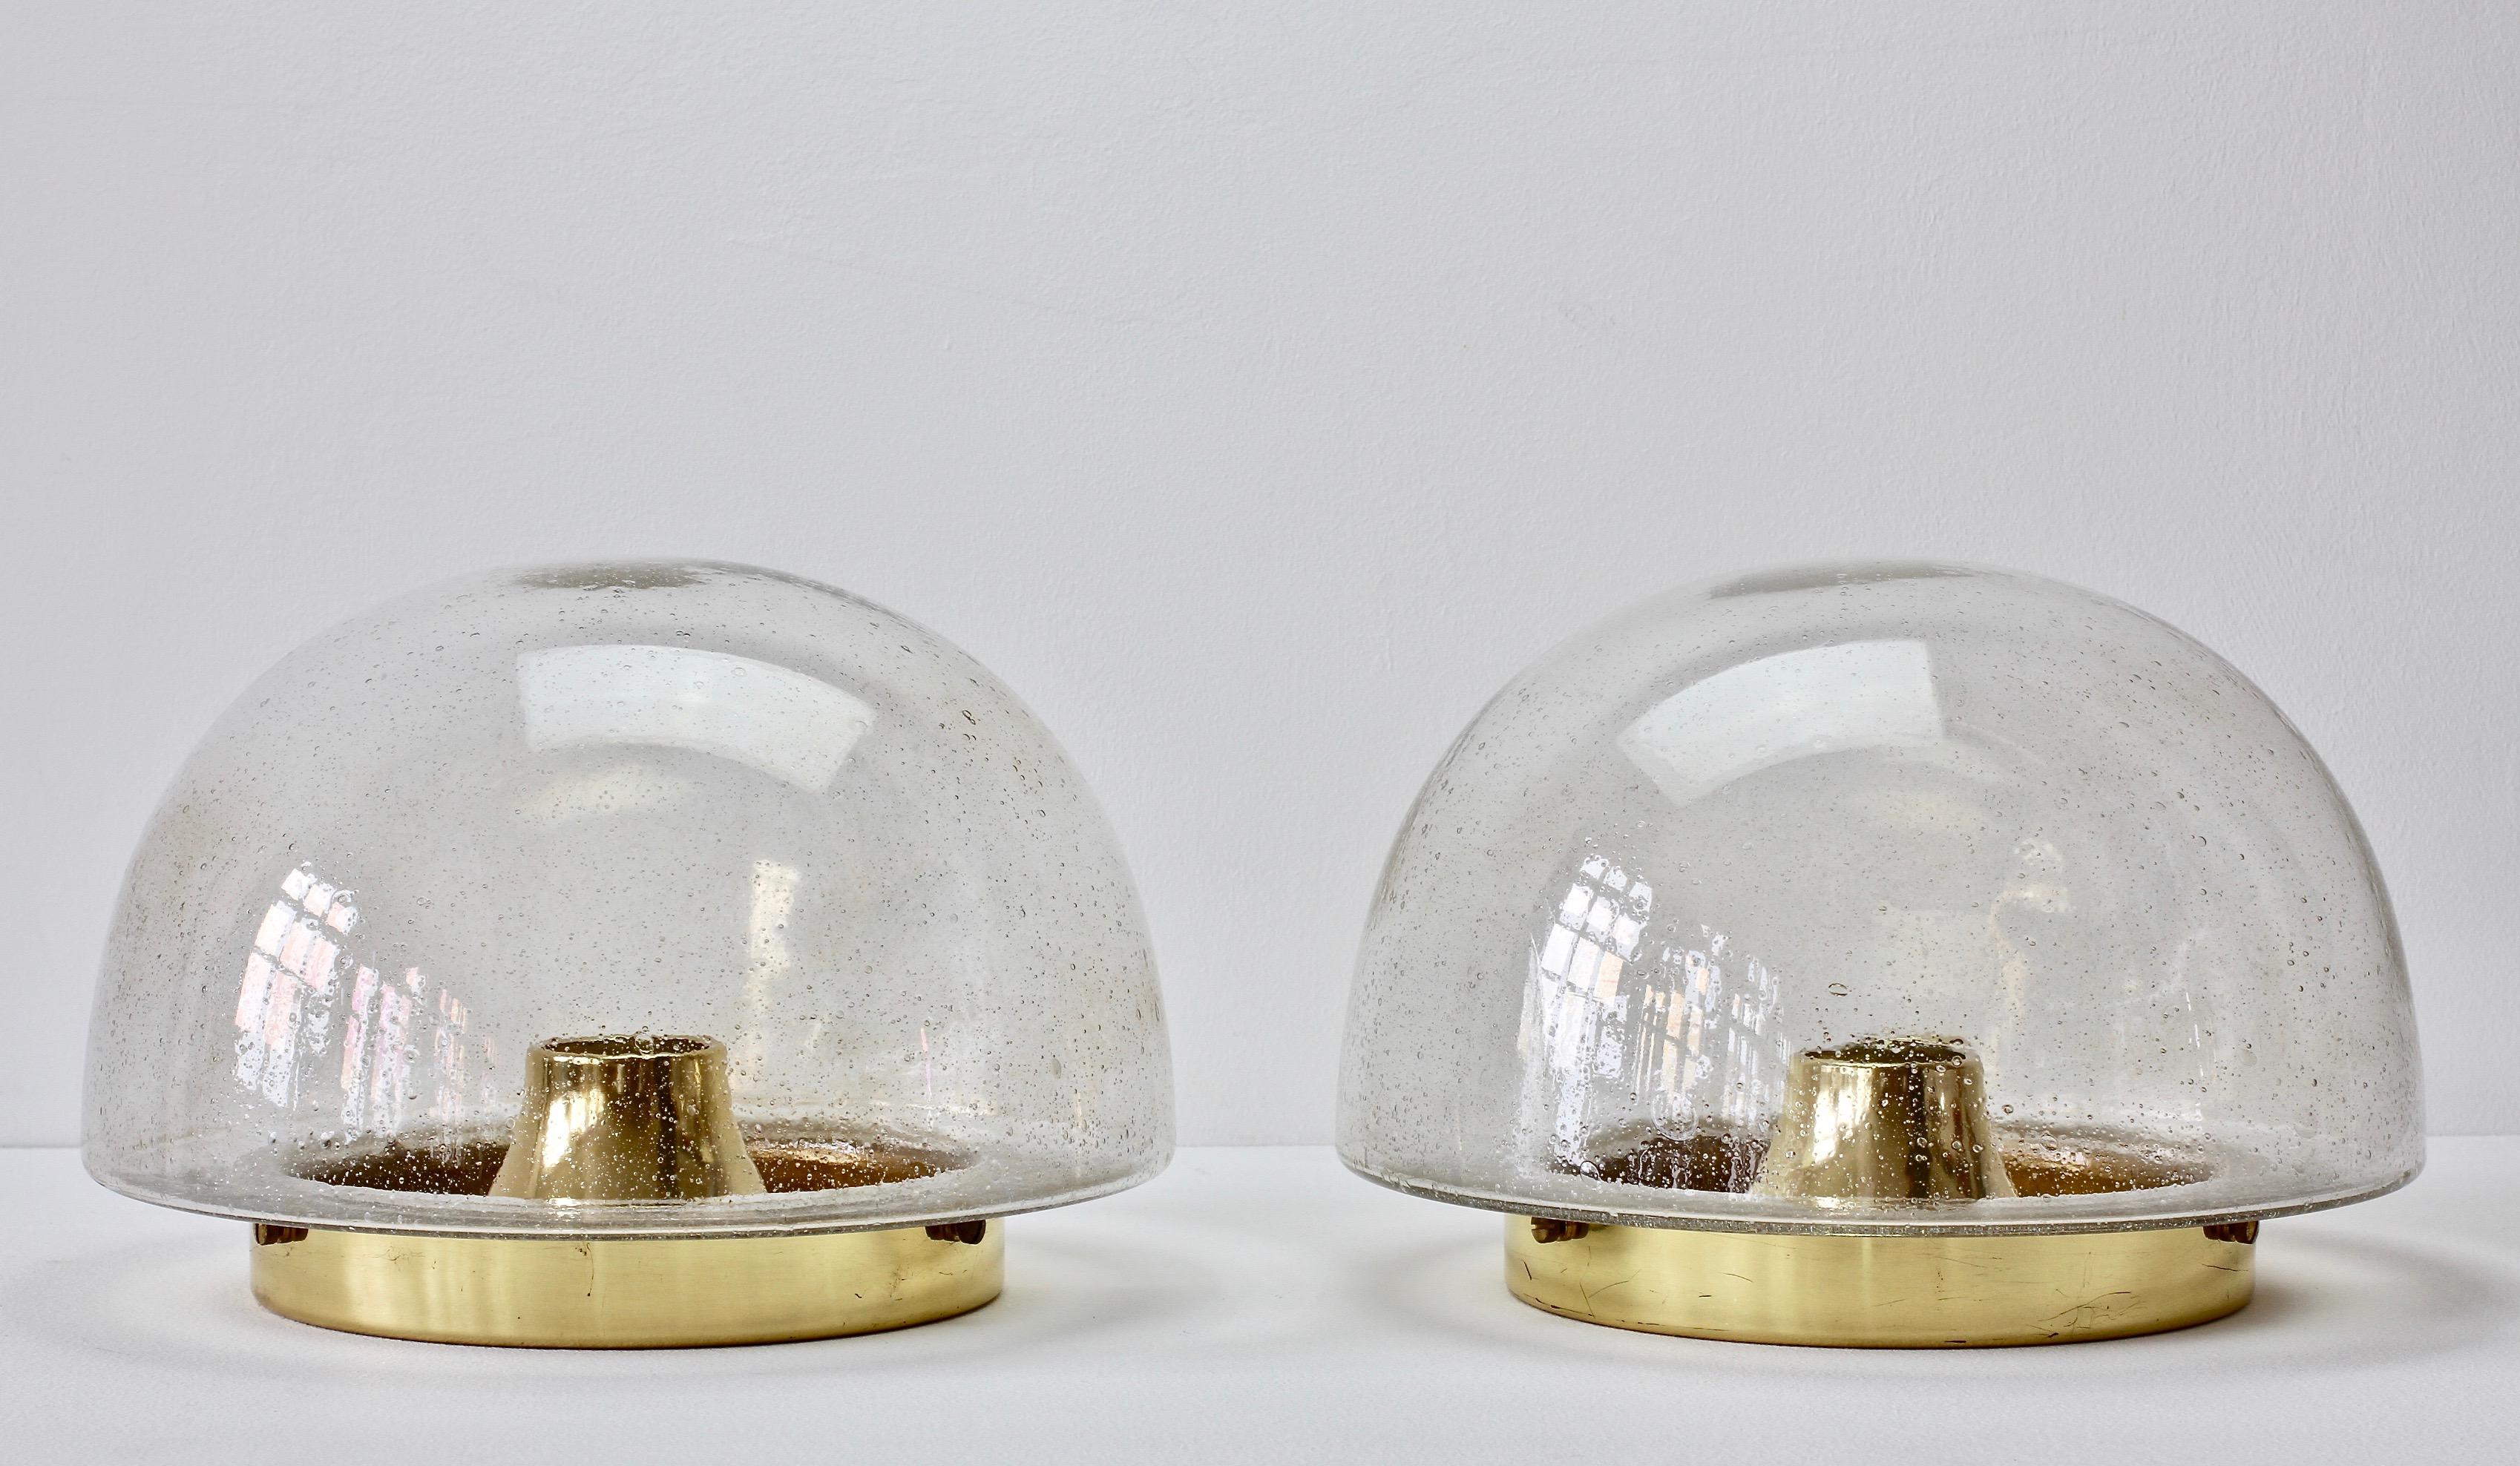 German made late Mid-Century Modern wall or ceiling flush mount lights produced by Glashütte Limburg, circa 1975. Featuring a round domed mouth blown bubble glass shade and a polished brass mount. Being mouth blown each piece of glass represents a